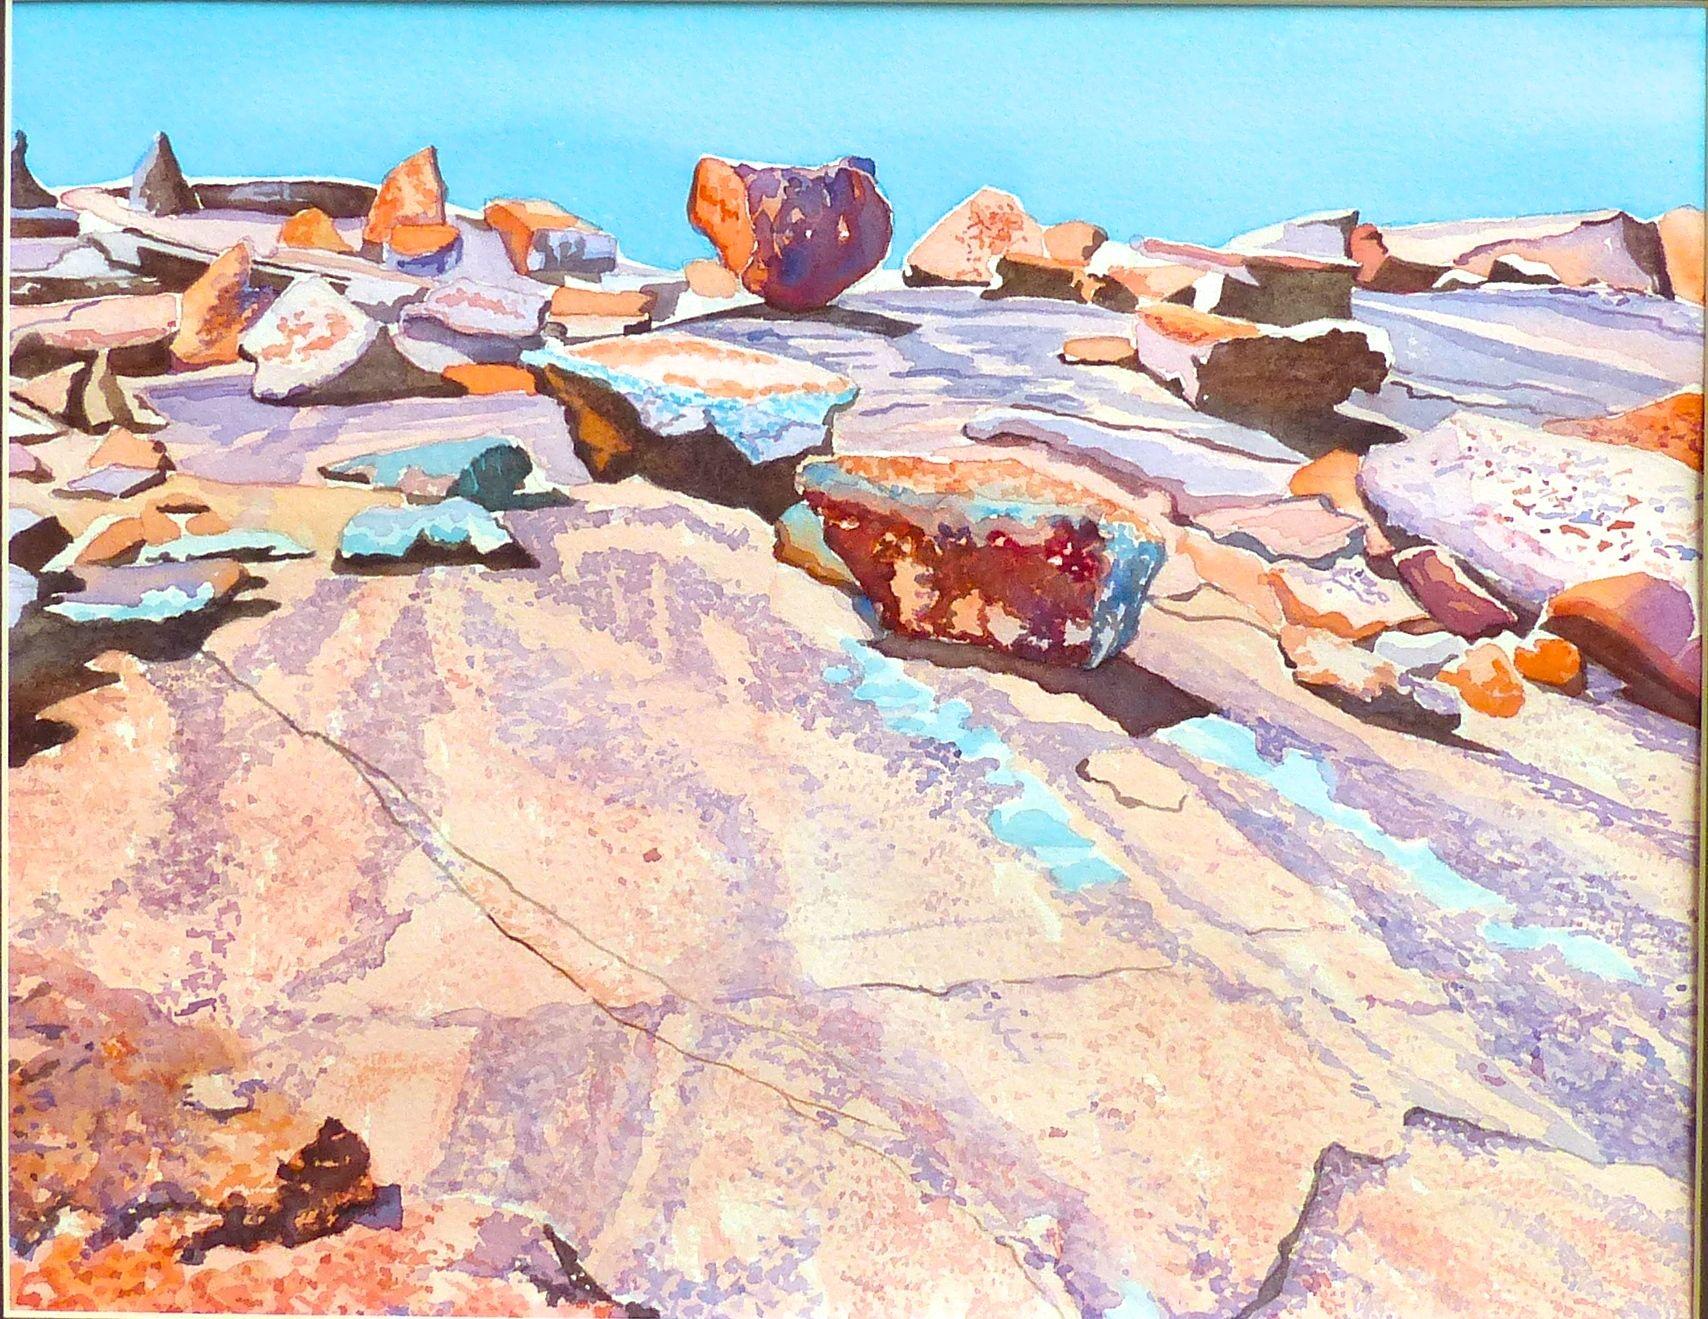 Hiking Enchanted Rock, Painting, Watercolor on Watercolor Paper - Art by Leslie White